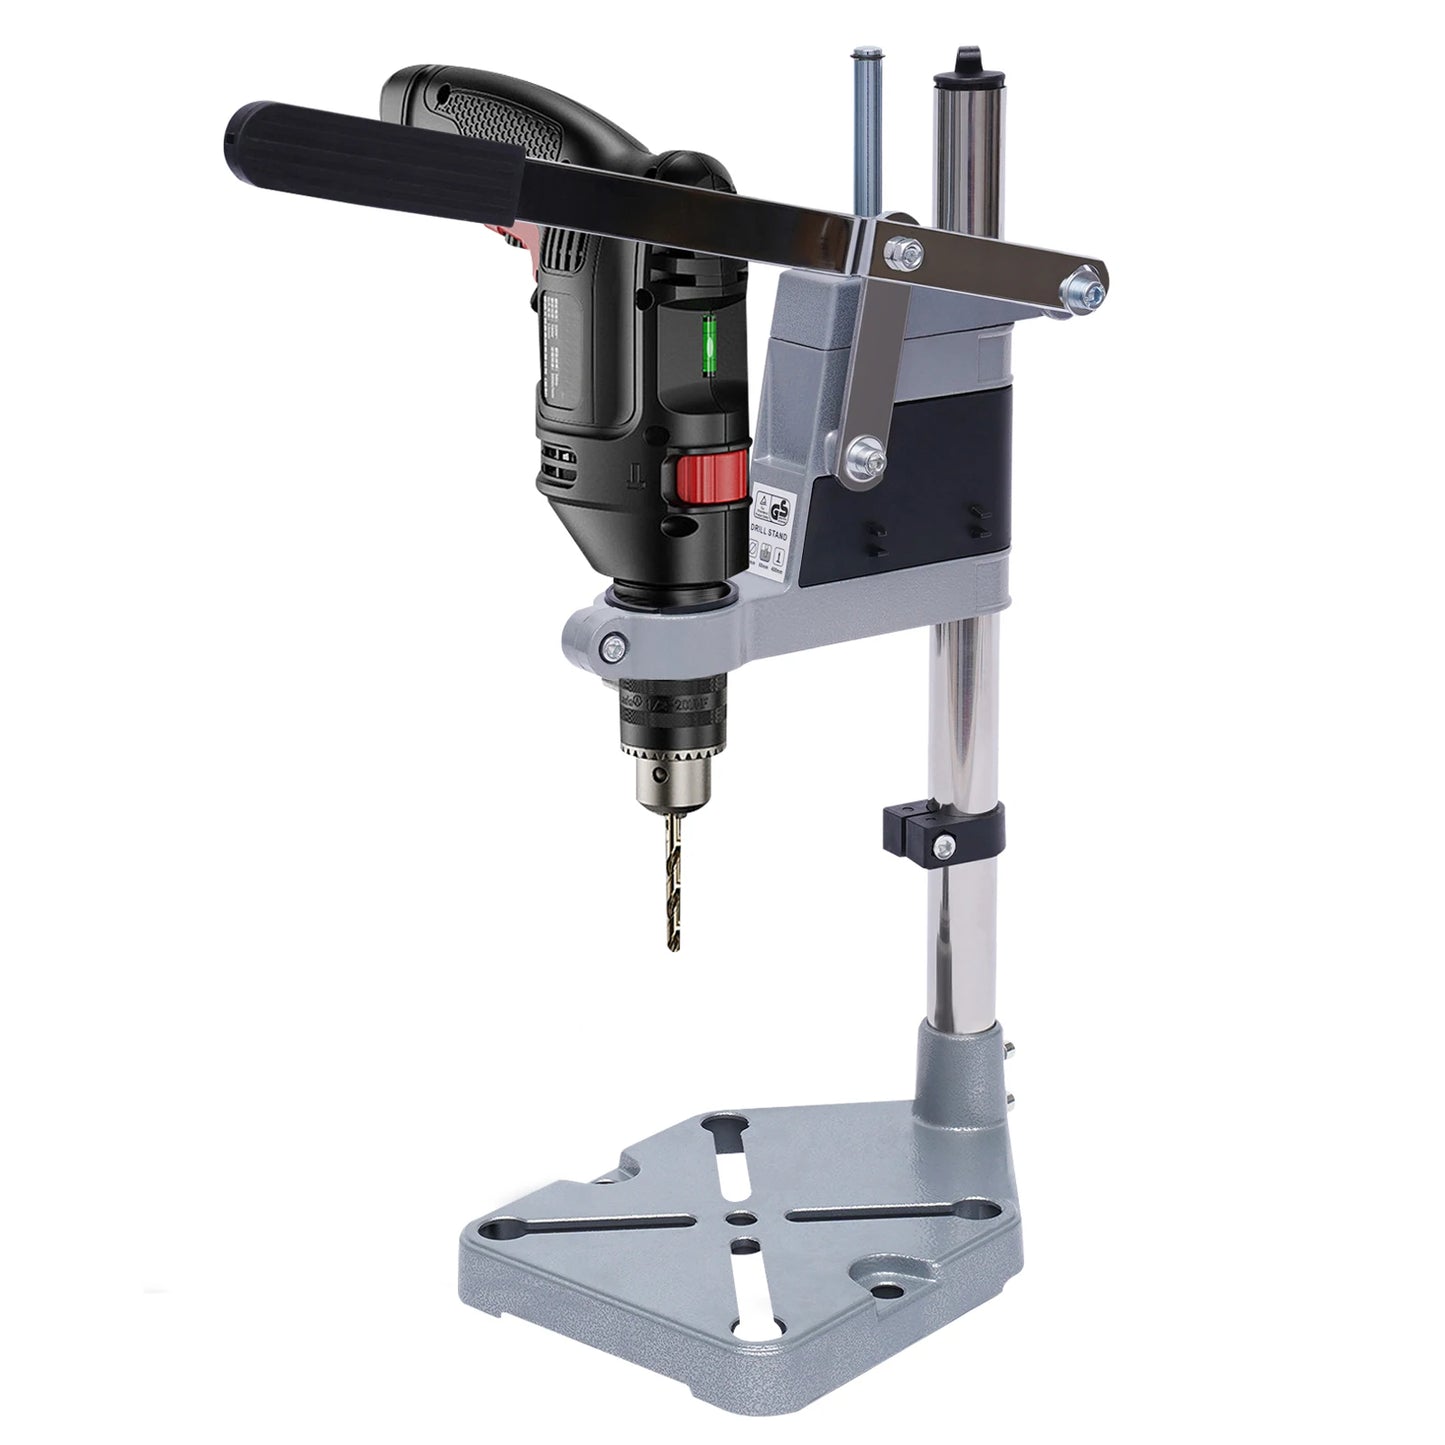 Adjustable Bench Clamp Floor Drill Press Stand Table Workbench Repair Tool For Drilling Base